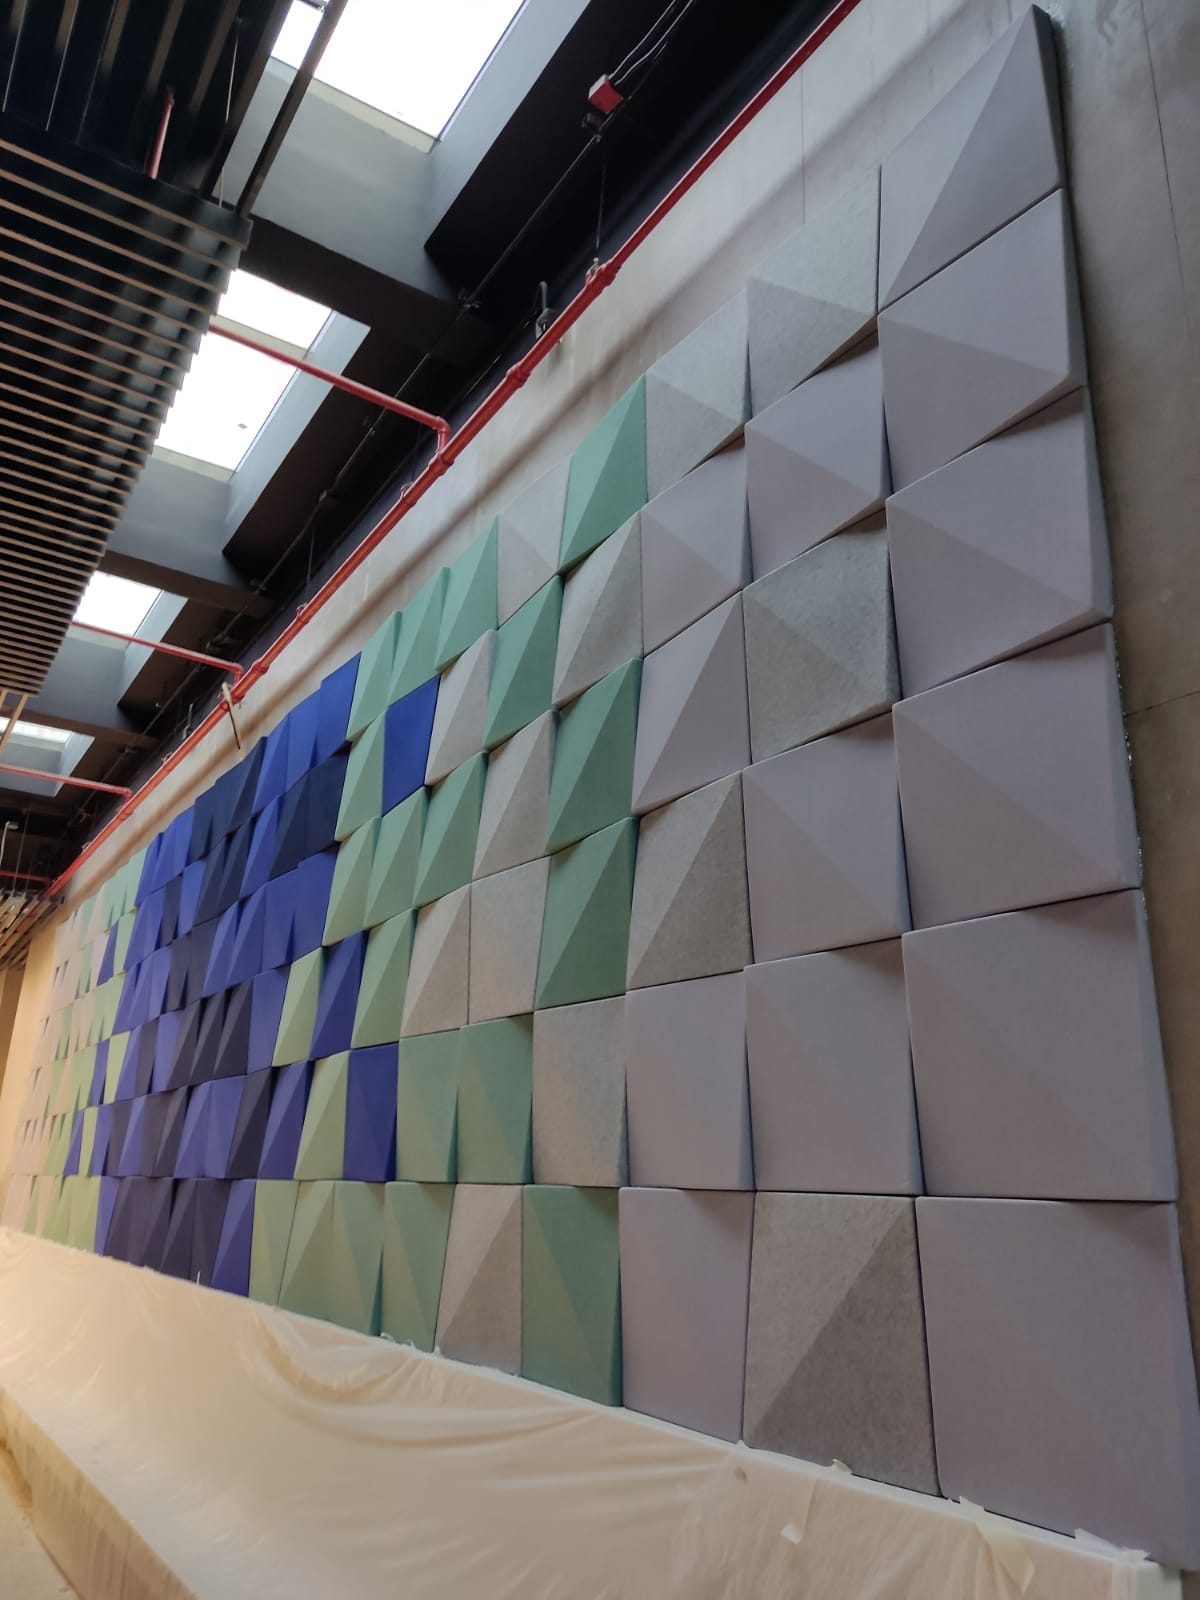 Acoustic Panels Manufacturers and Distributors to Improve Sound Quality